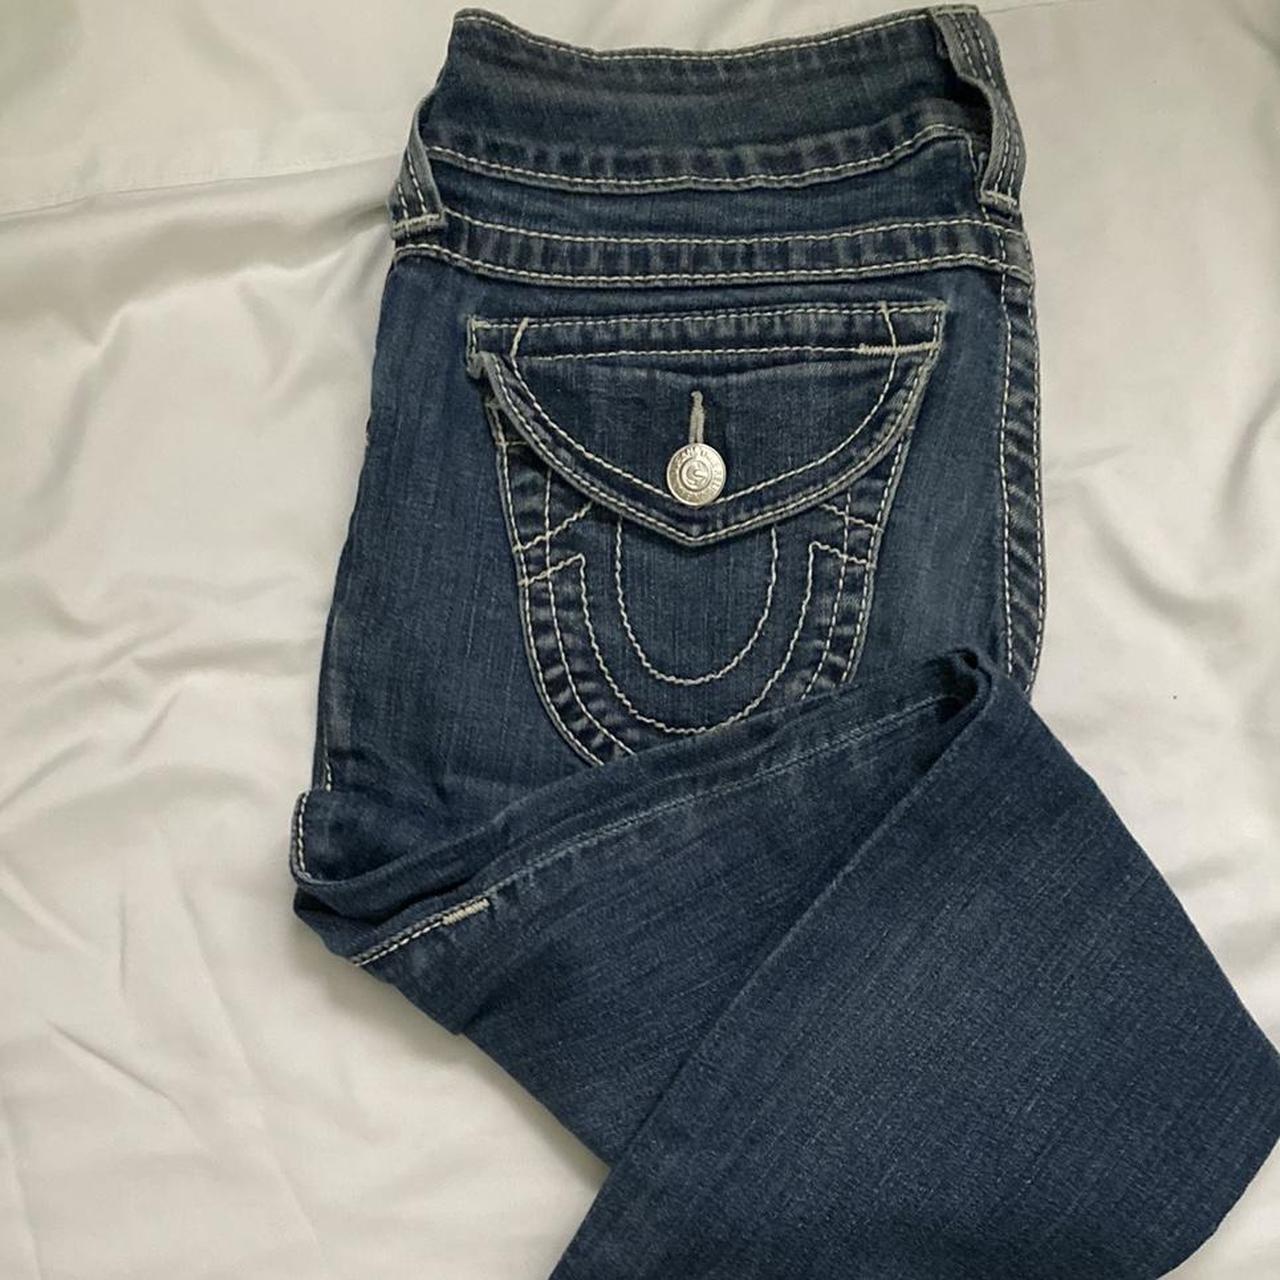 True Religion Women's Navy and White Jeans